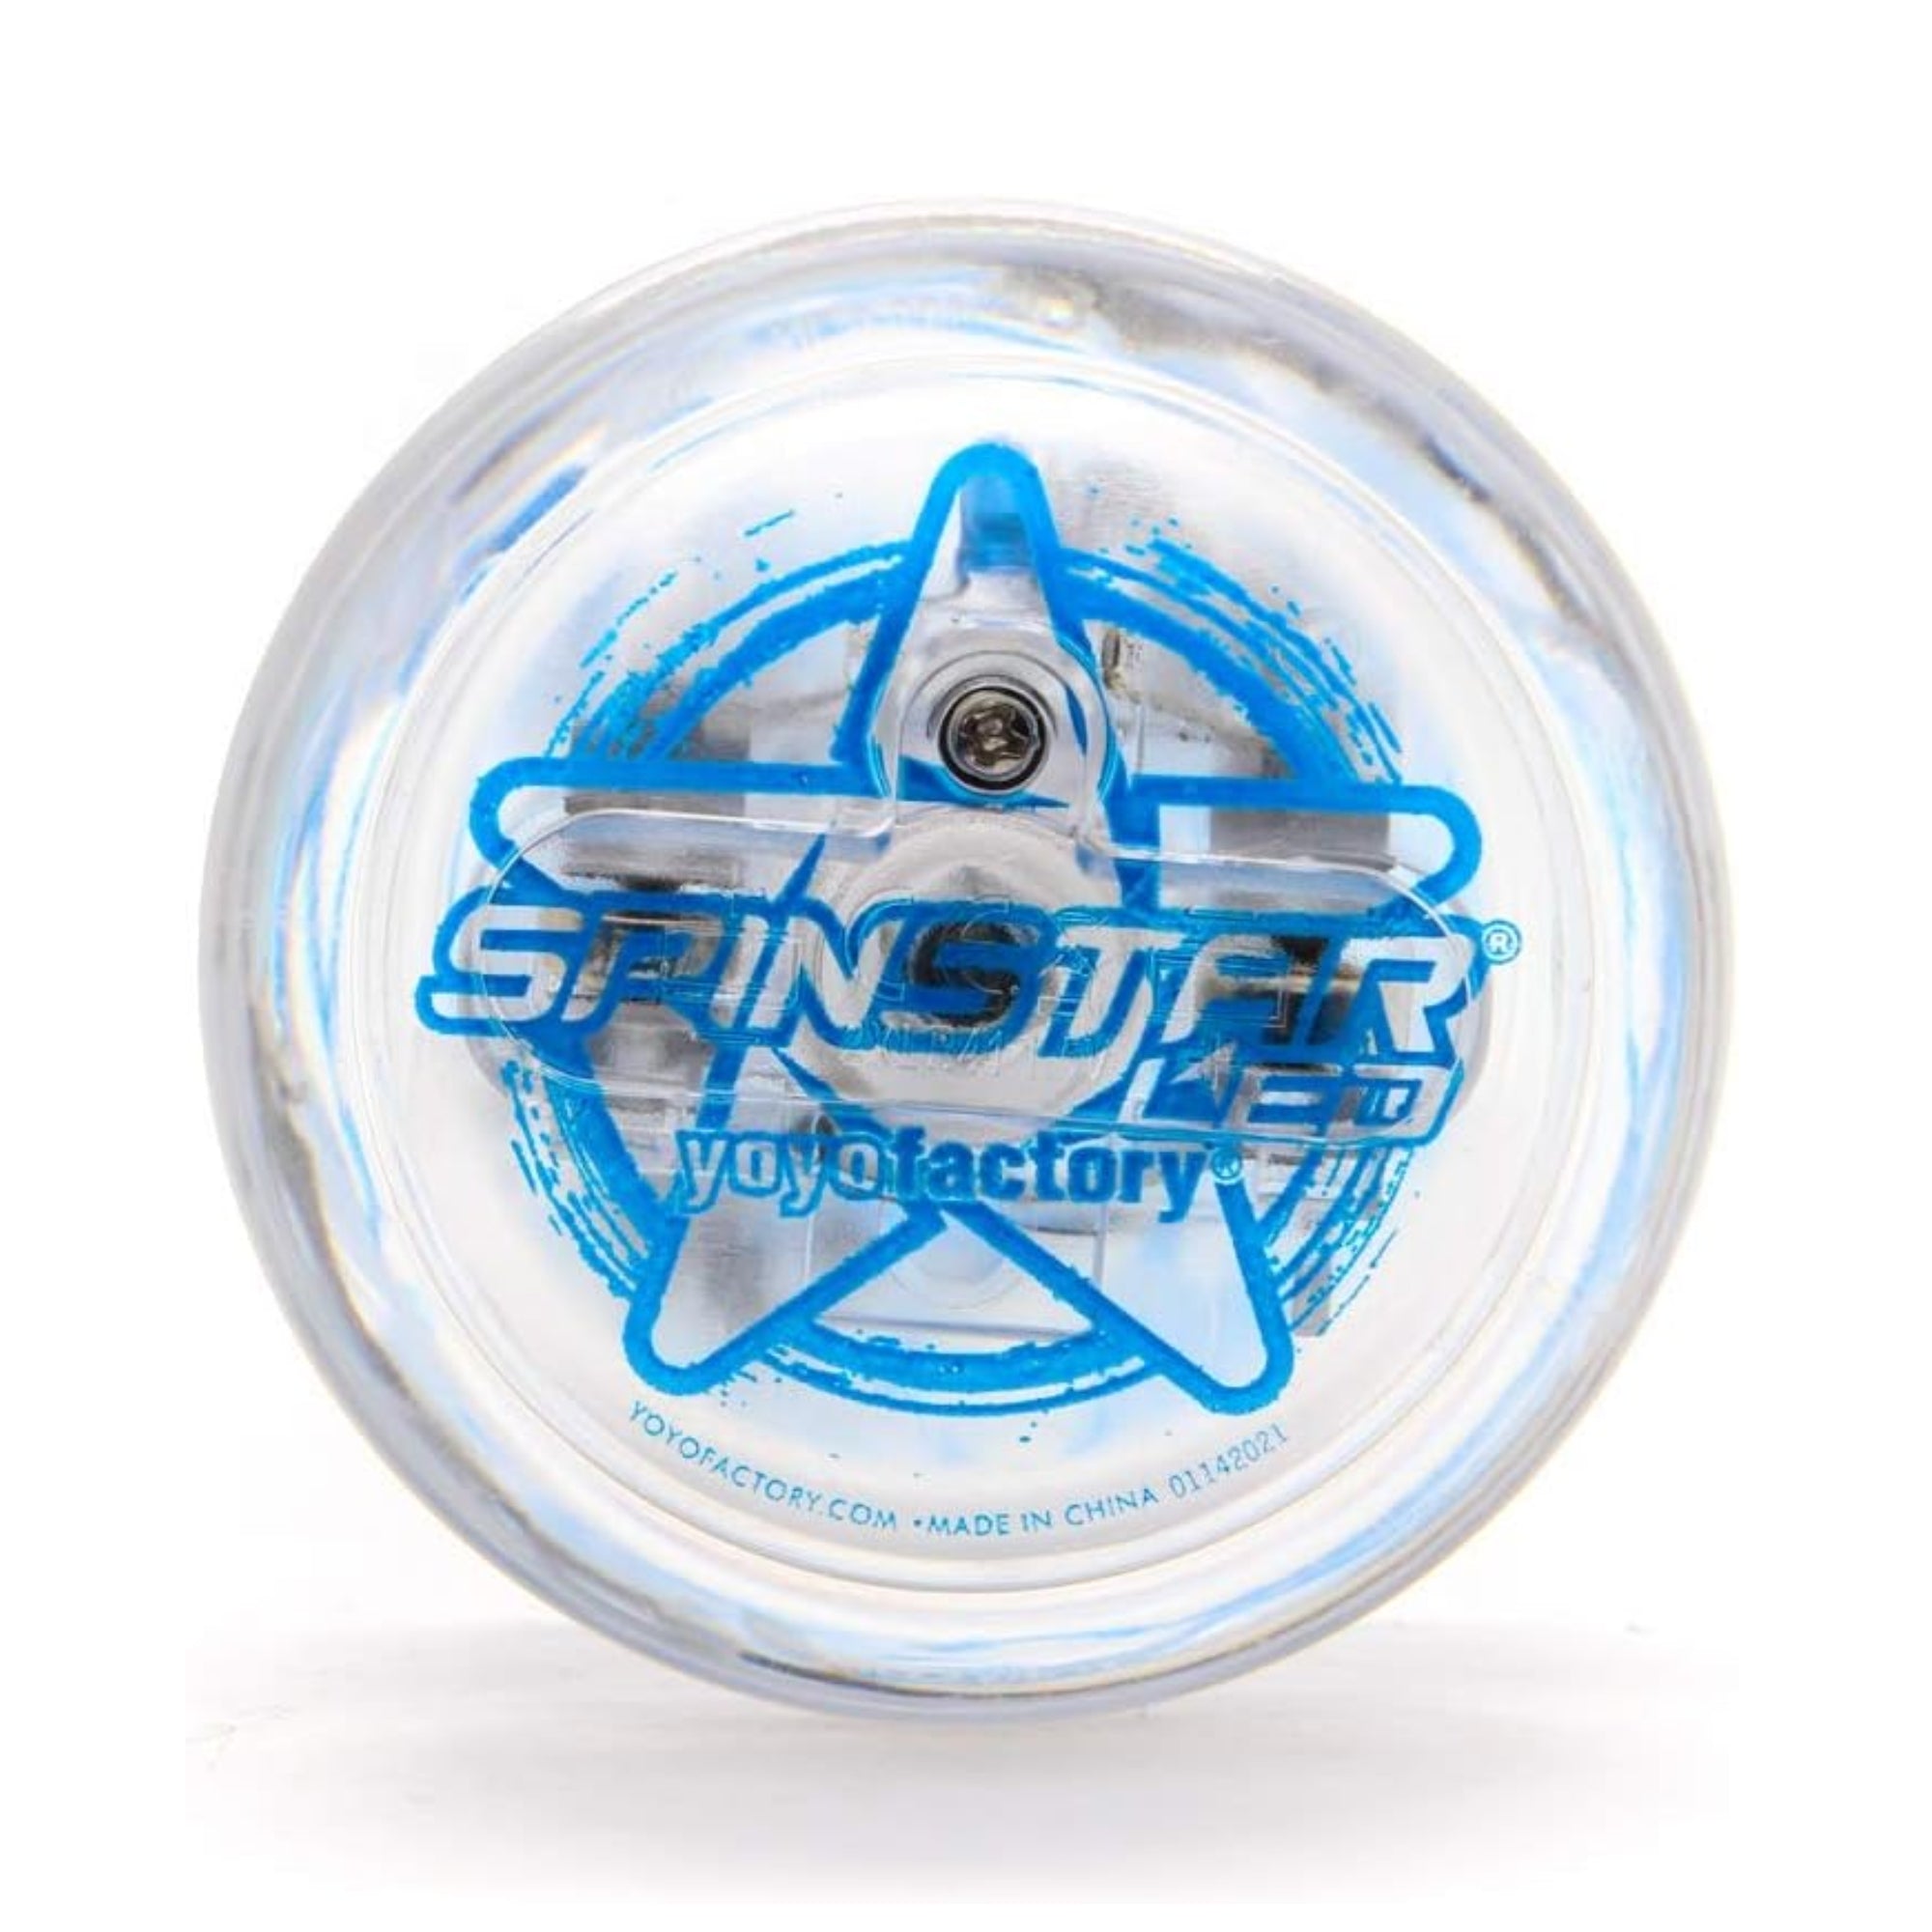 yoyo with clear body and blue writing on the side